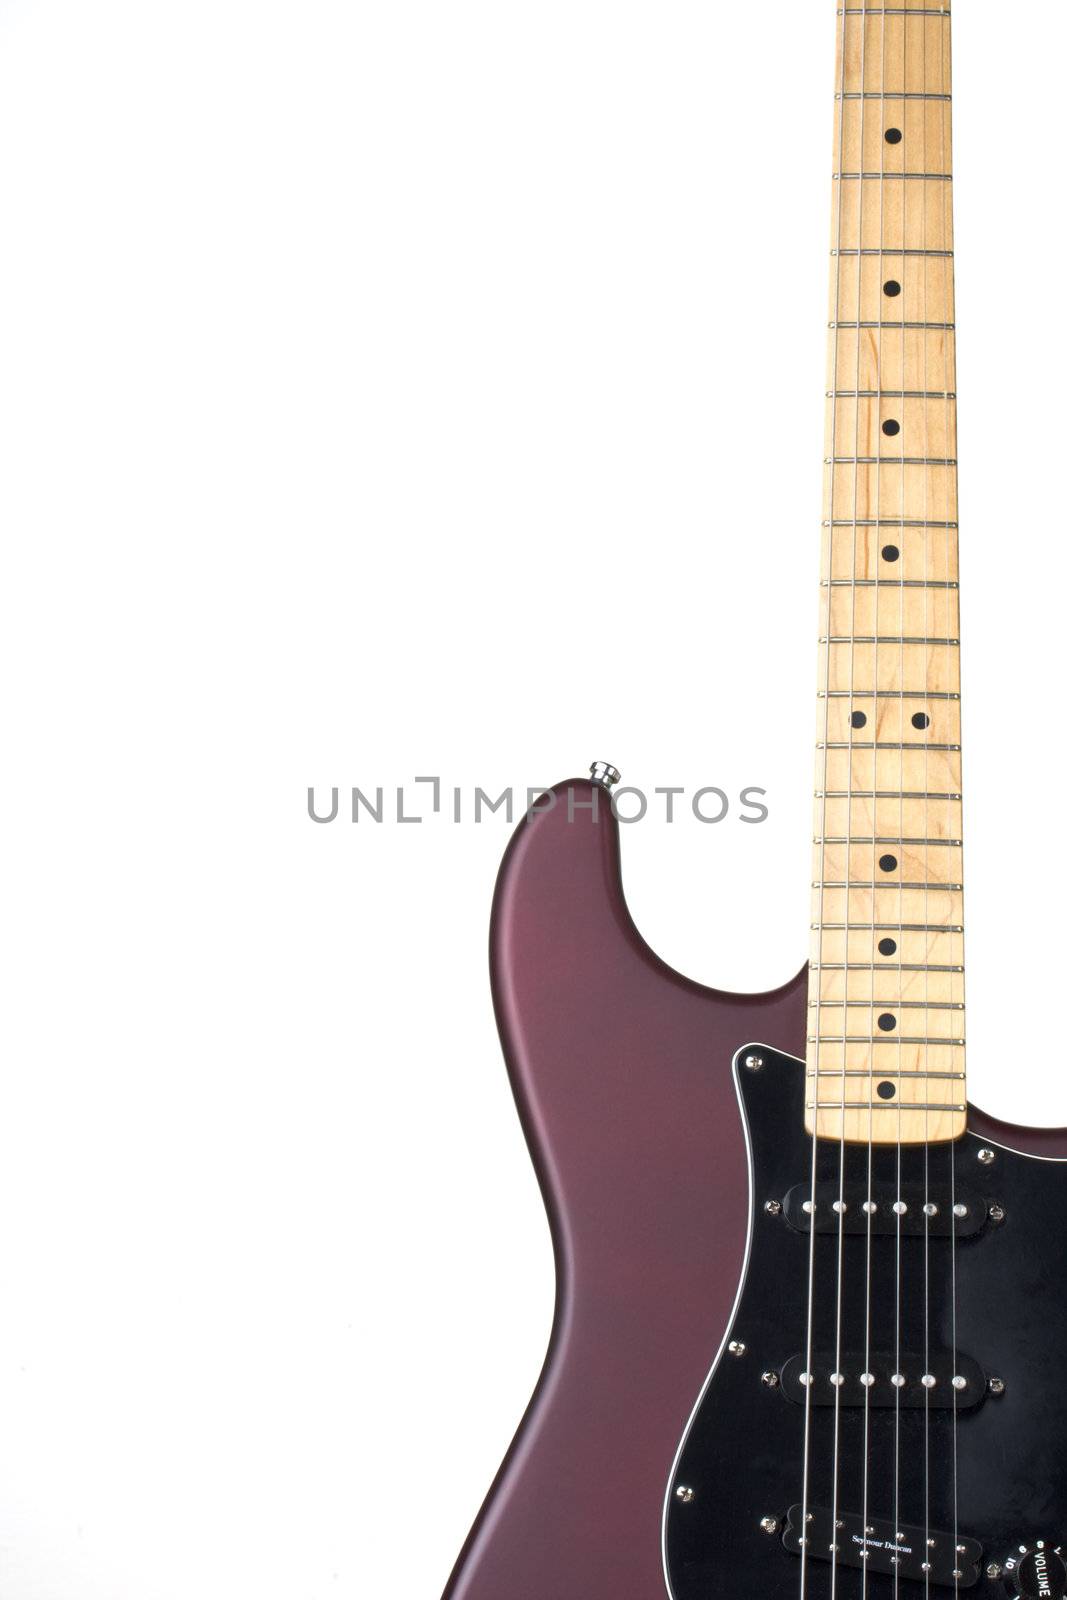 detail of a guitar neck on white background